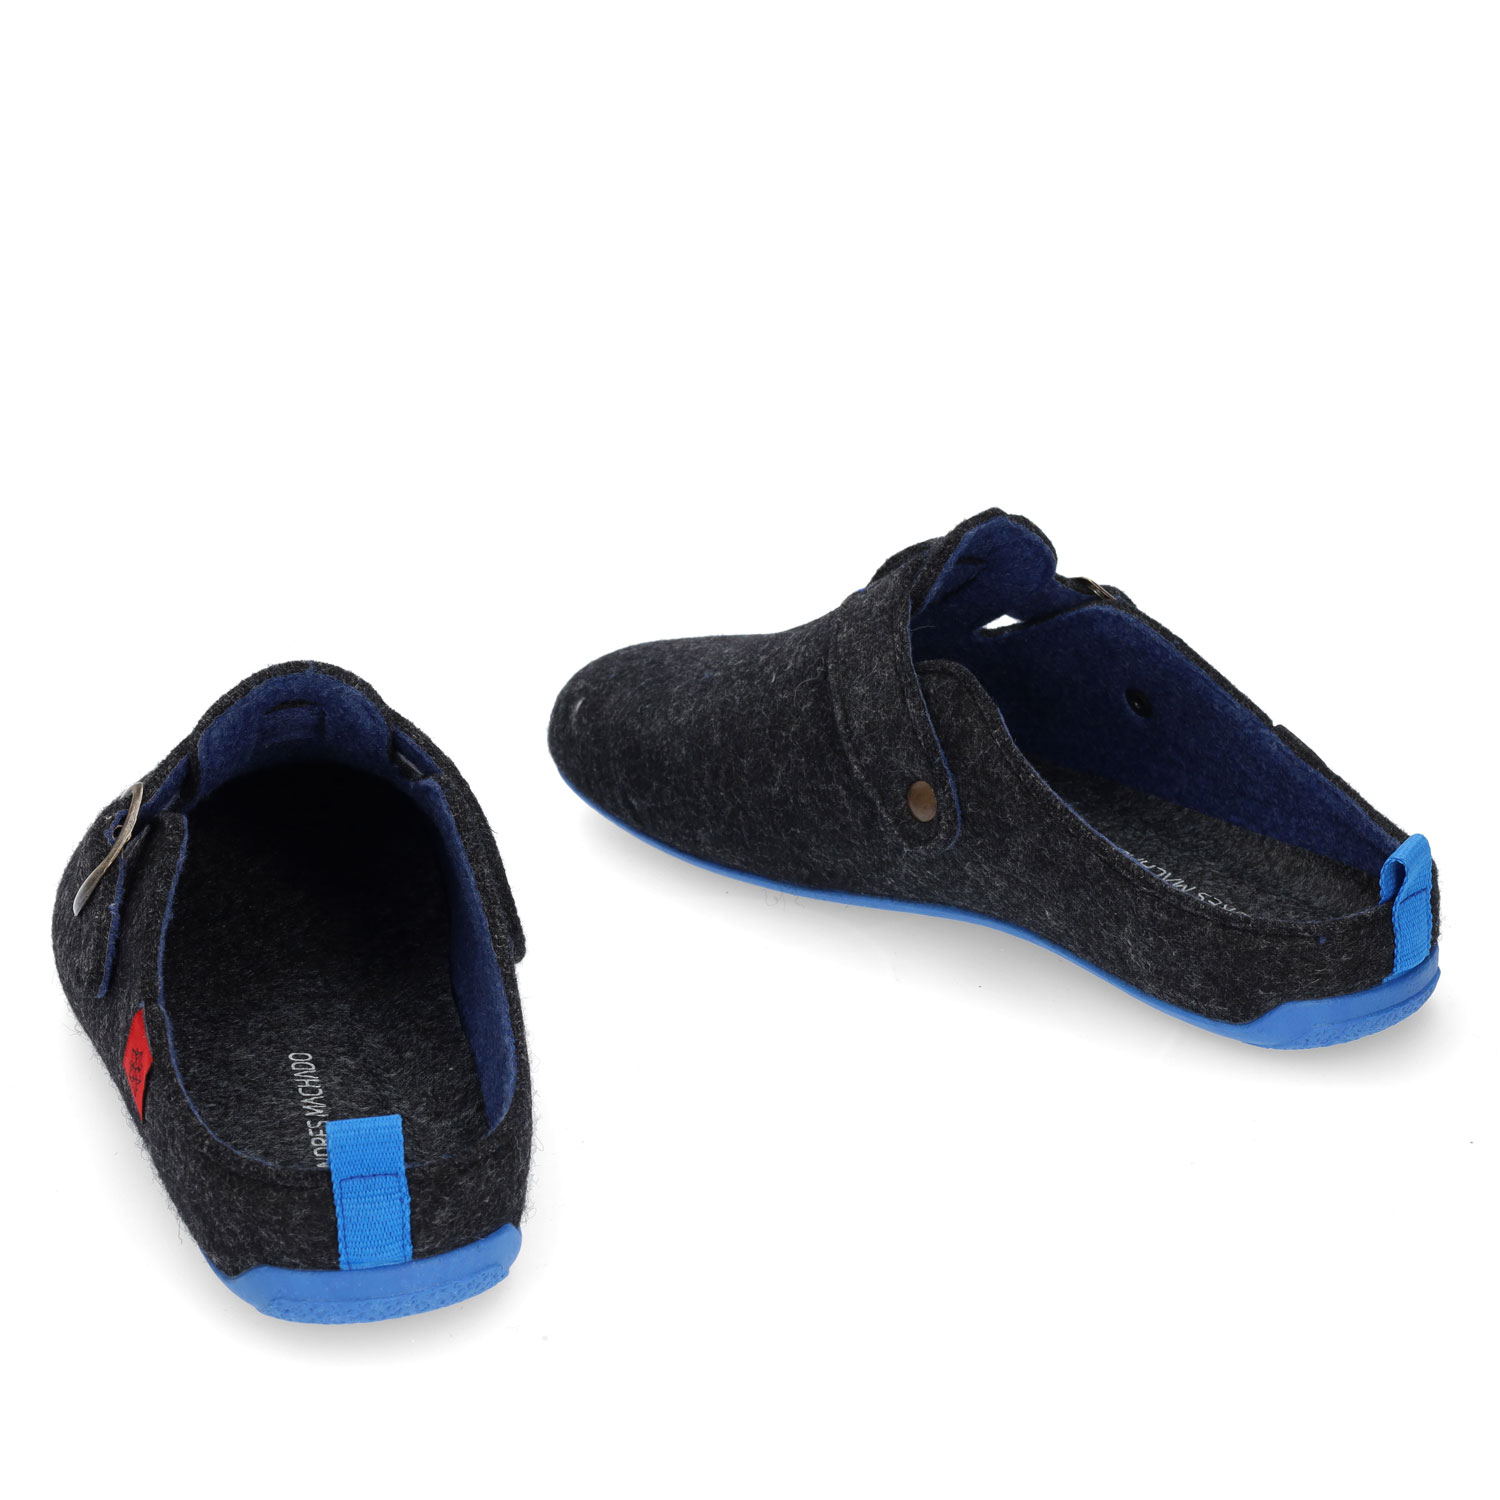 Unisex home slippers in black felt and buckle detail 